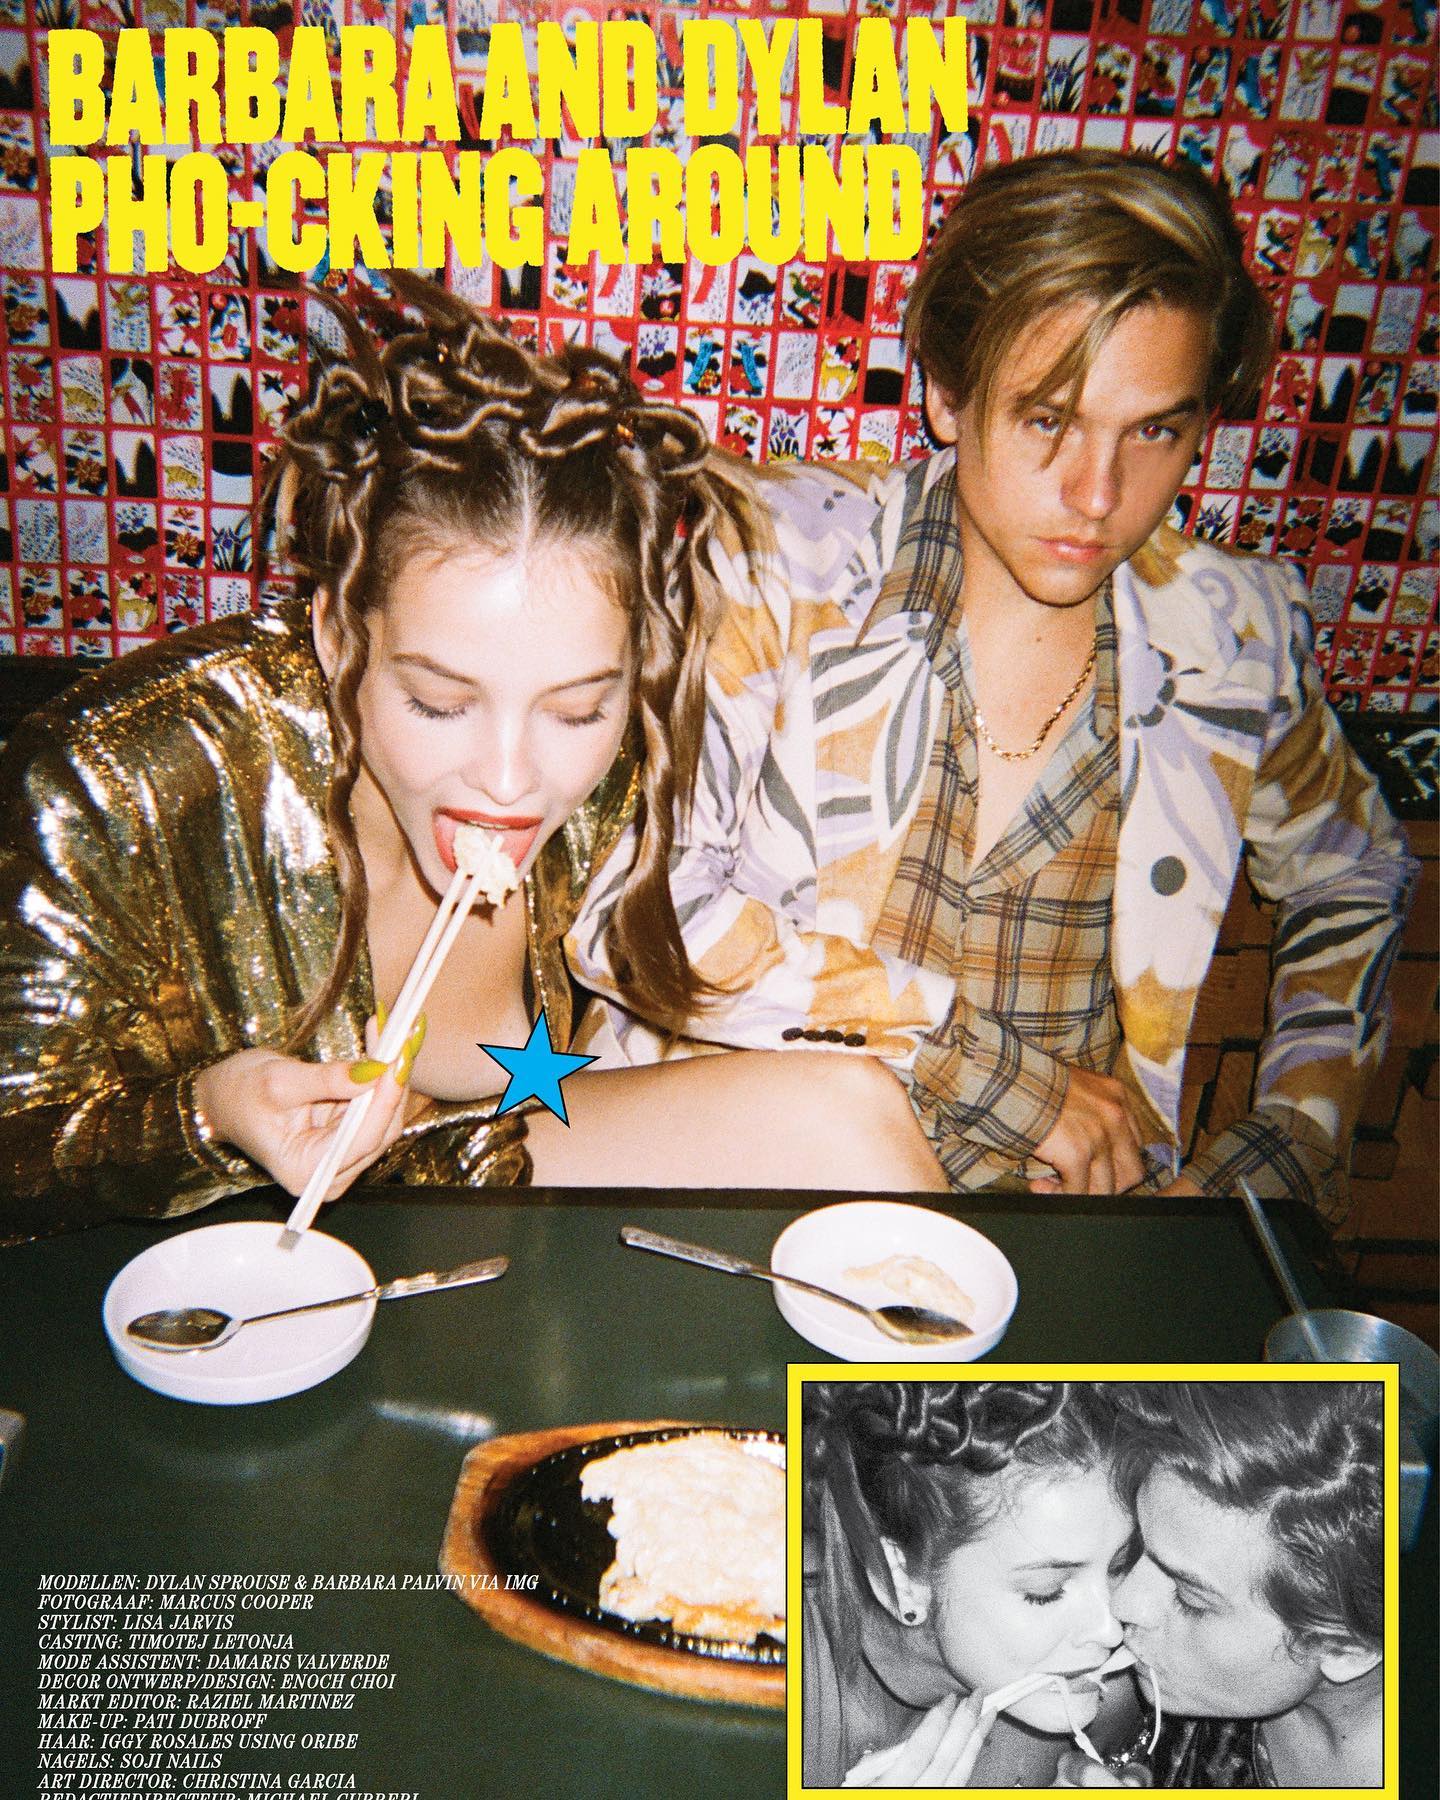 Barbara Palvin y Dylan Sprouse Hit the Cover! - Photo 12